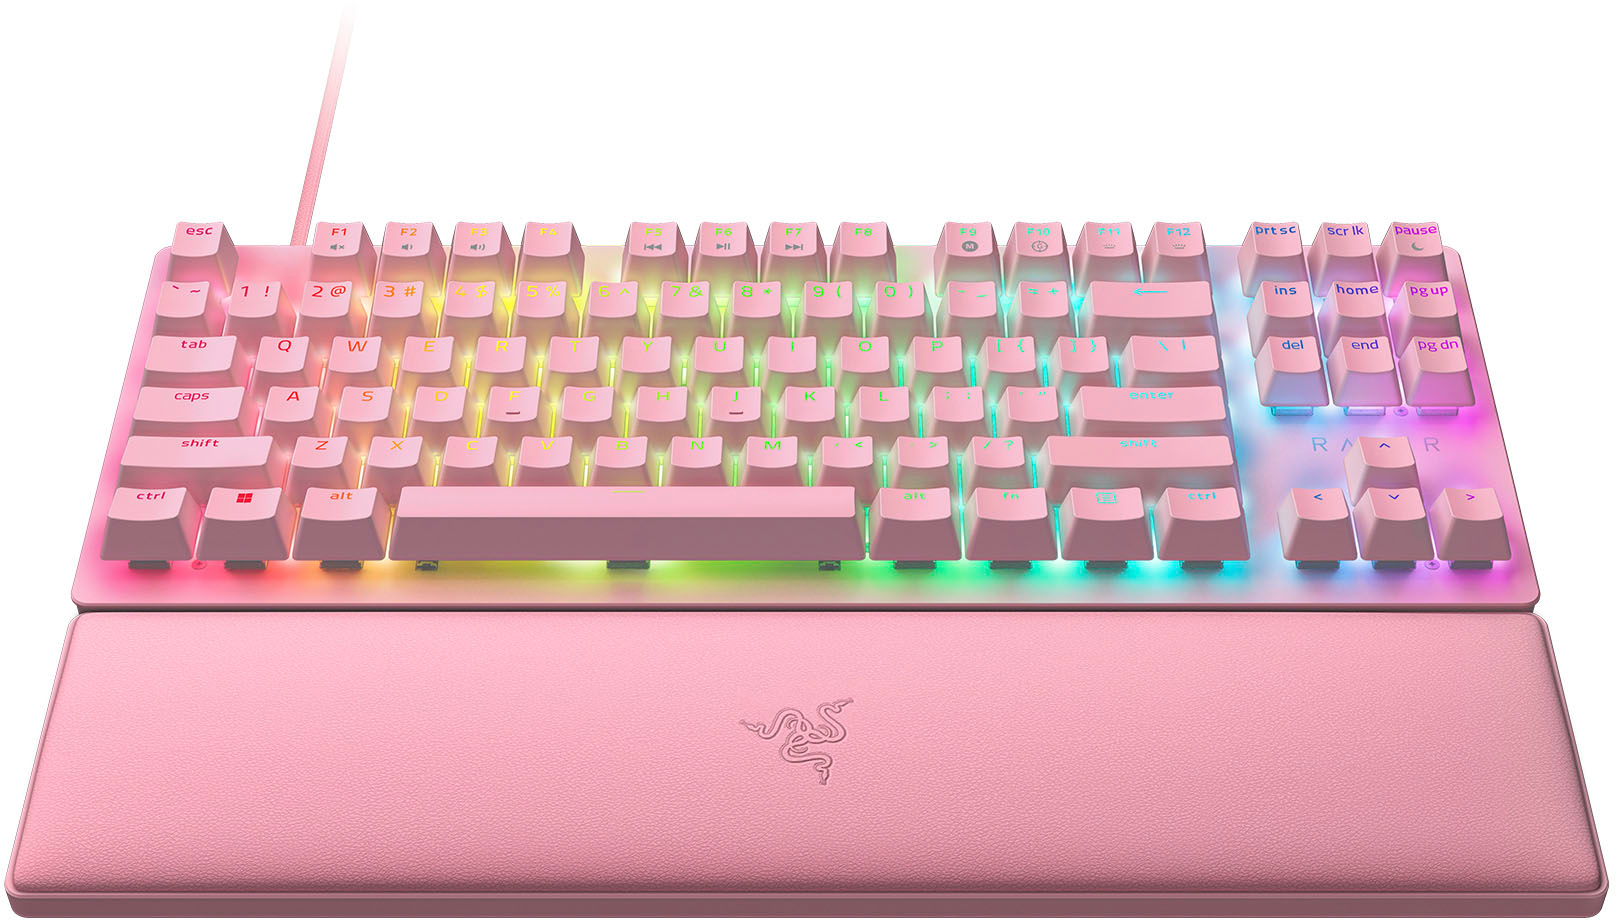  Razer Huntsman V2 TKL Gaming Keyboard: Fast Linear Optical  Switches Gen2, Sound Dampeners, 8000Hz Polling Rate, Detachable Type-C  Cable, UV-Coated Keycaps, Wrist Rest - ESL Edition : Electronics